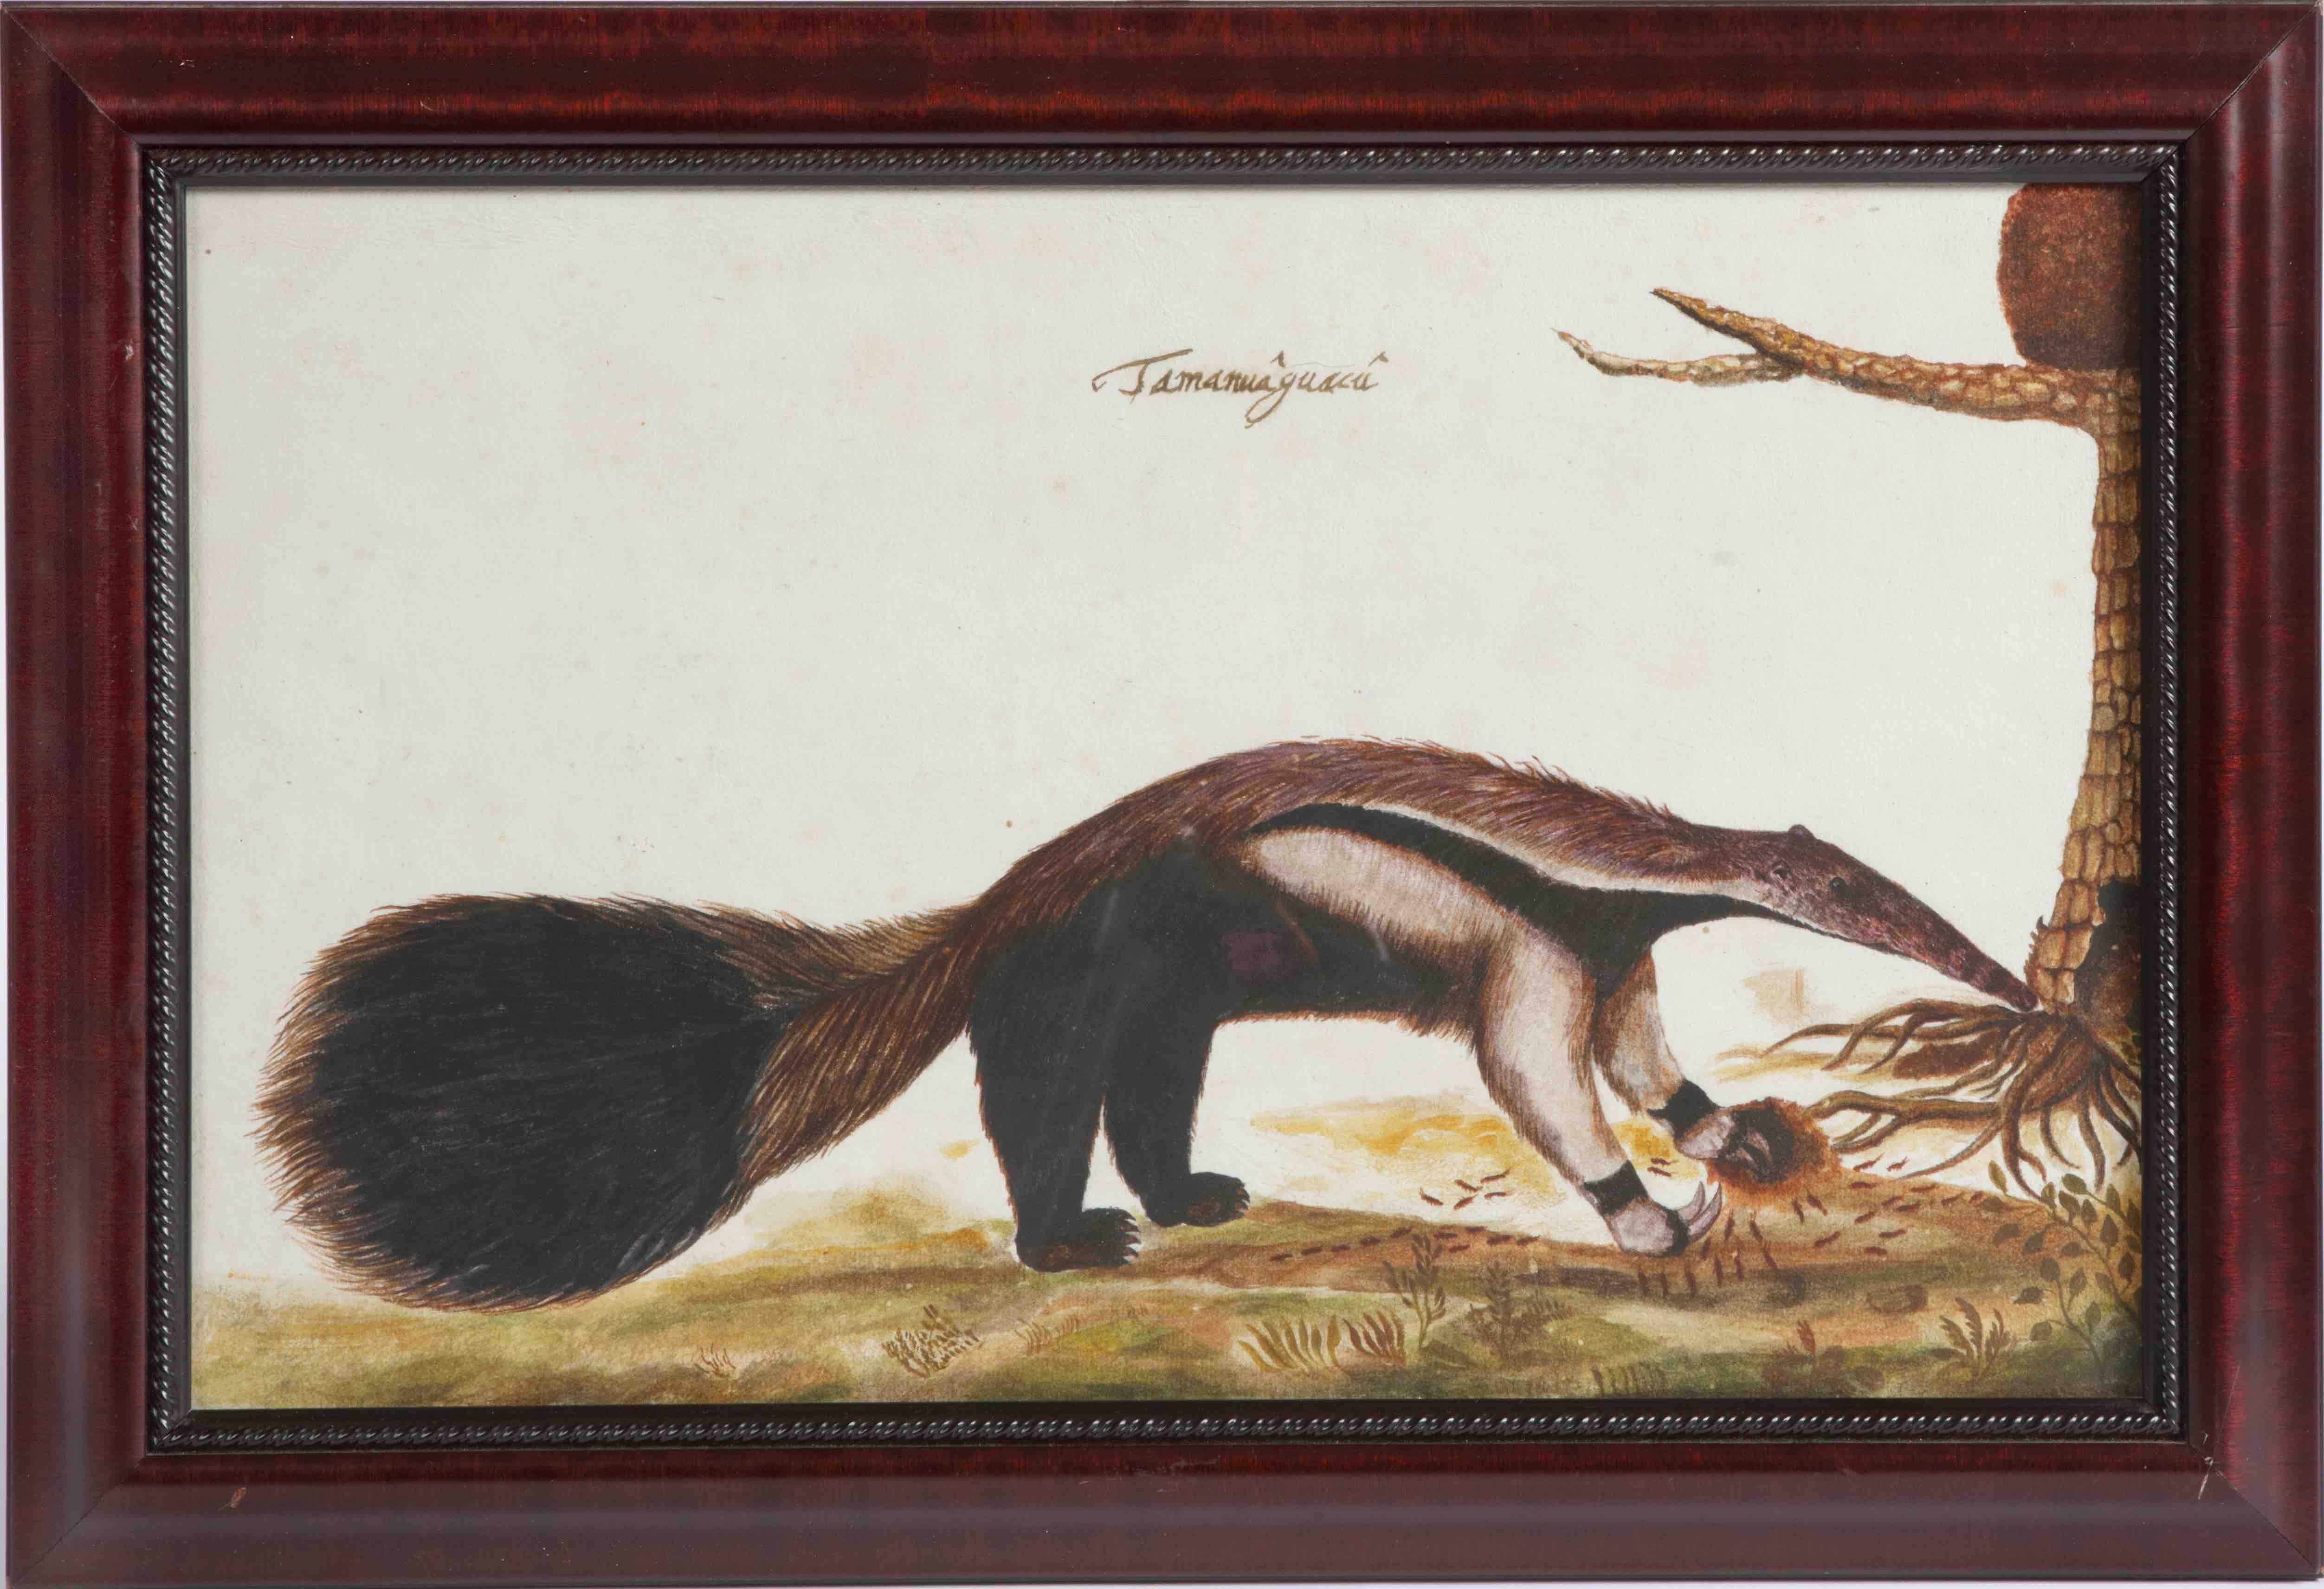 Animal painting of a 'Tamanuâguacû (Ant-eater)' late 17th/18th century, Brazil